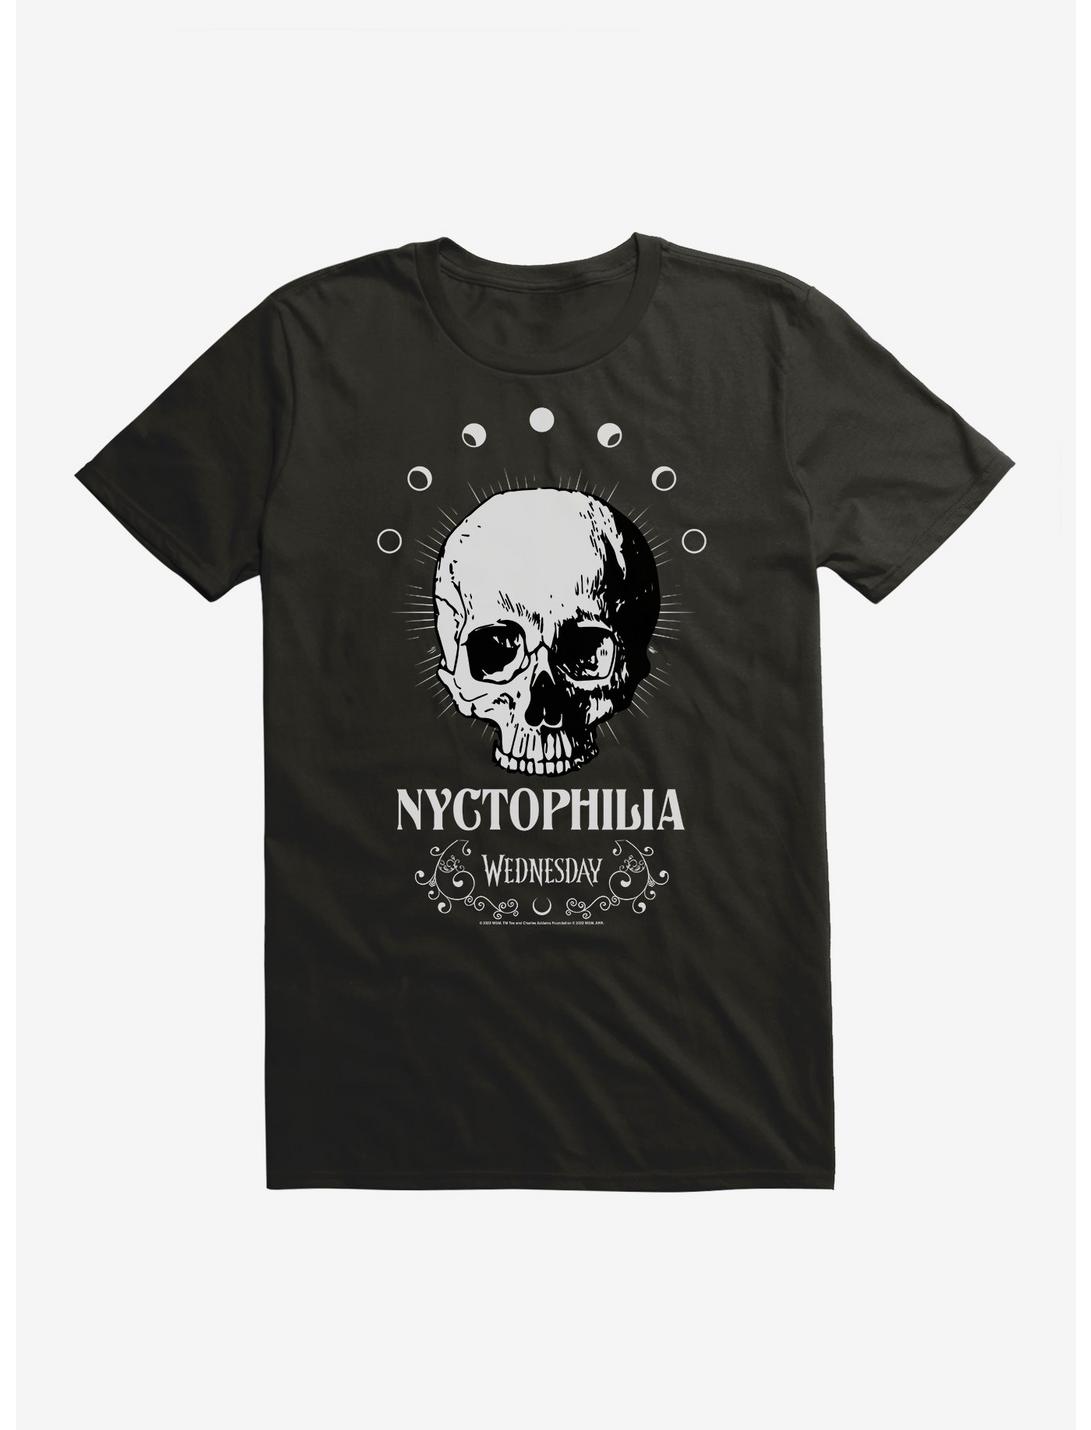 Wednesday Nyctophilia T-Shirt, BLACK, hi-res